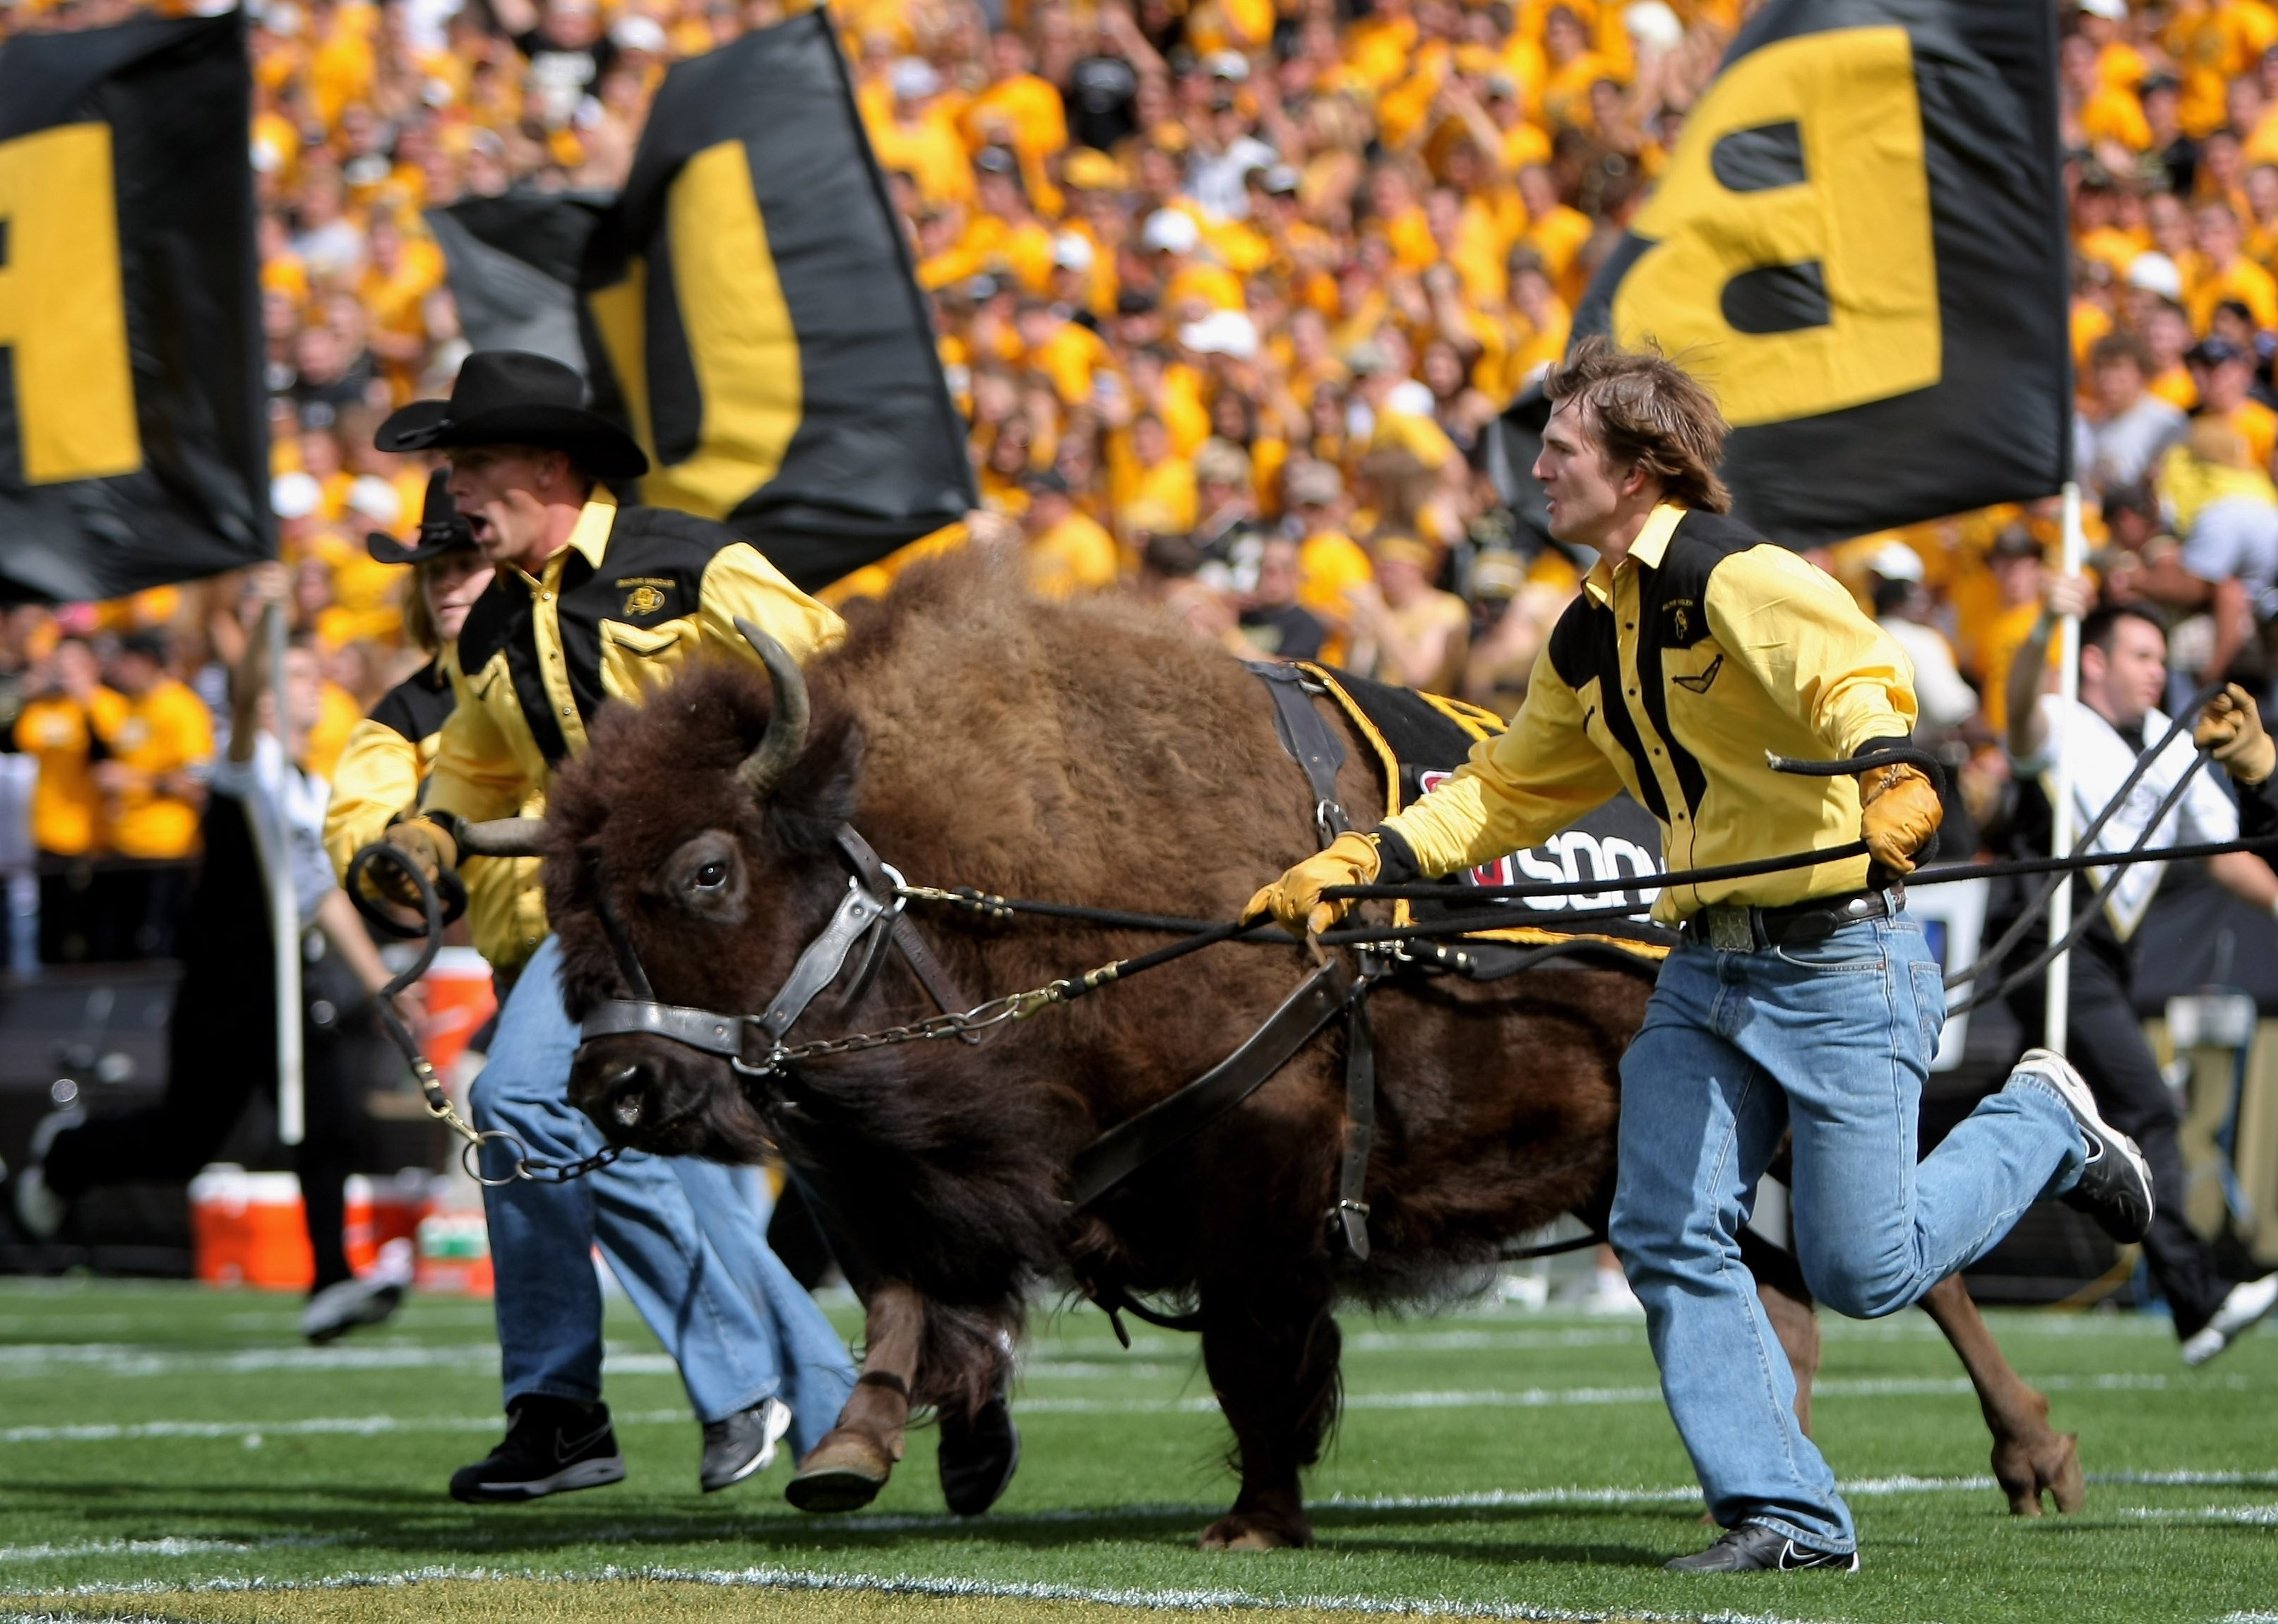  Ralphie IV, the mascot of the Colorado Buffaloes, is escorted onto the field.